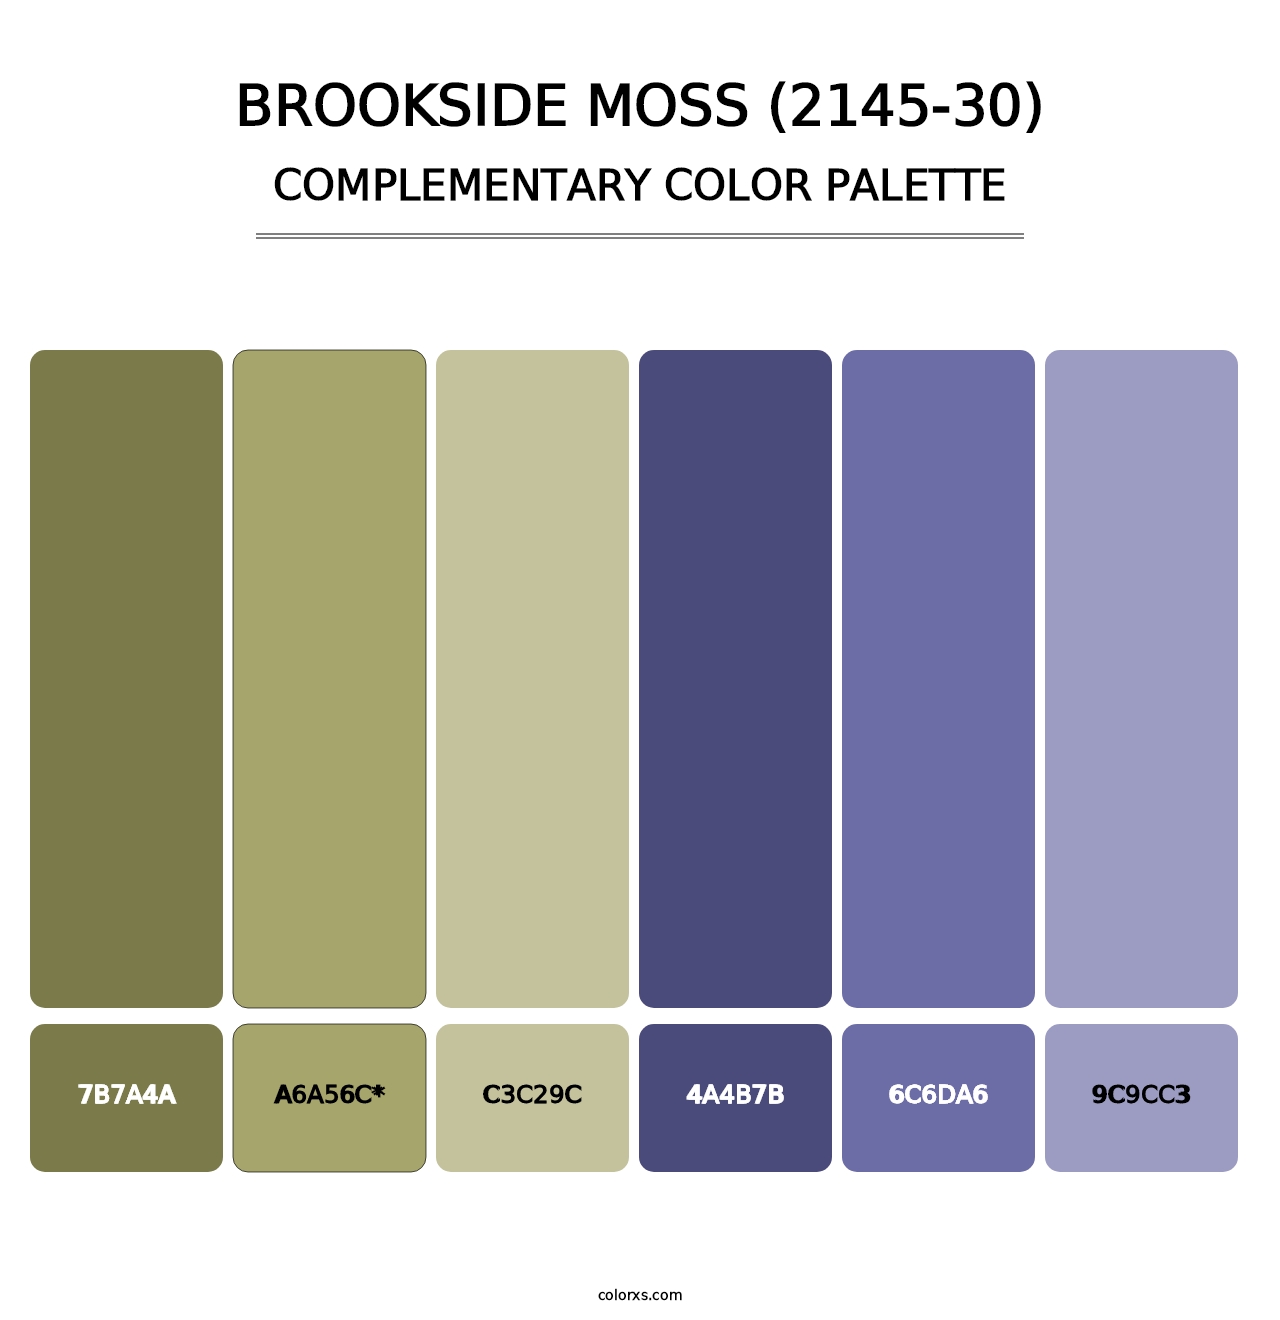 Brookside Moss (2145-30) - Complementary Color Palette